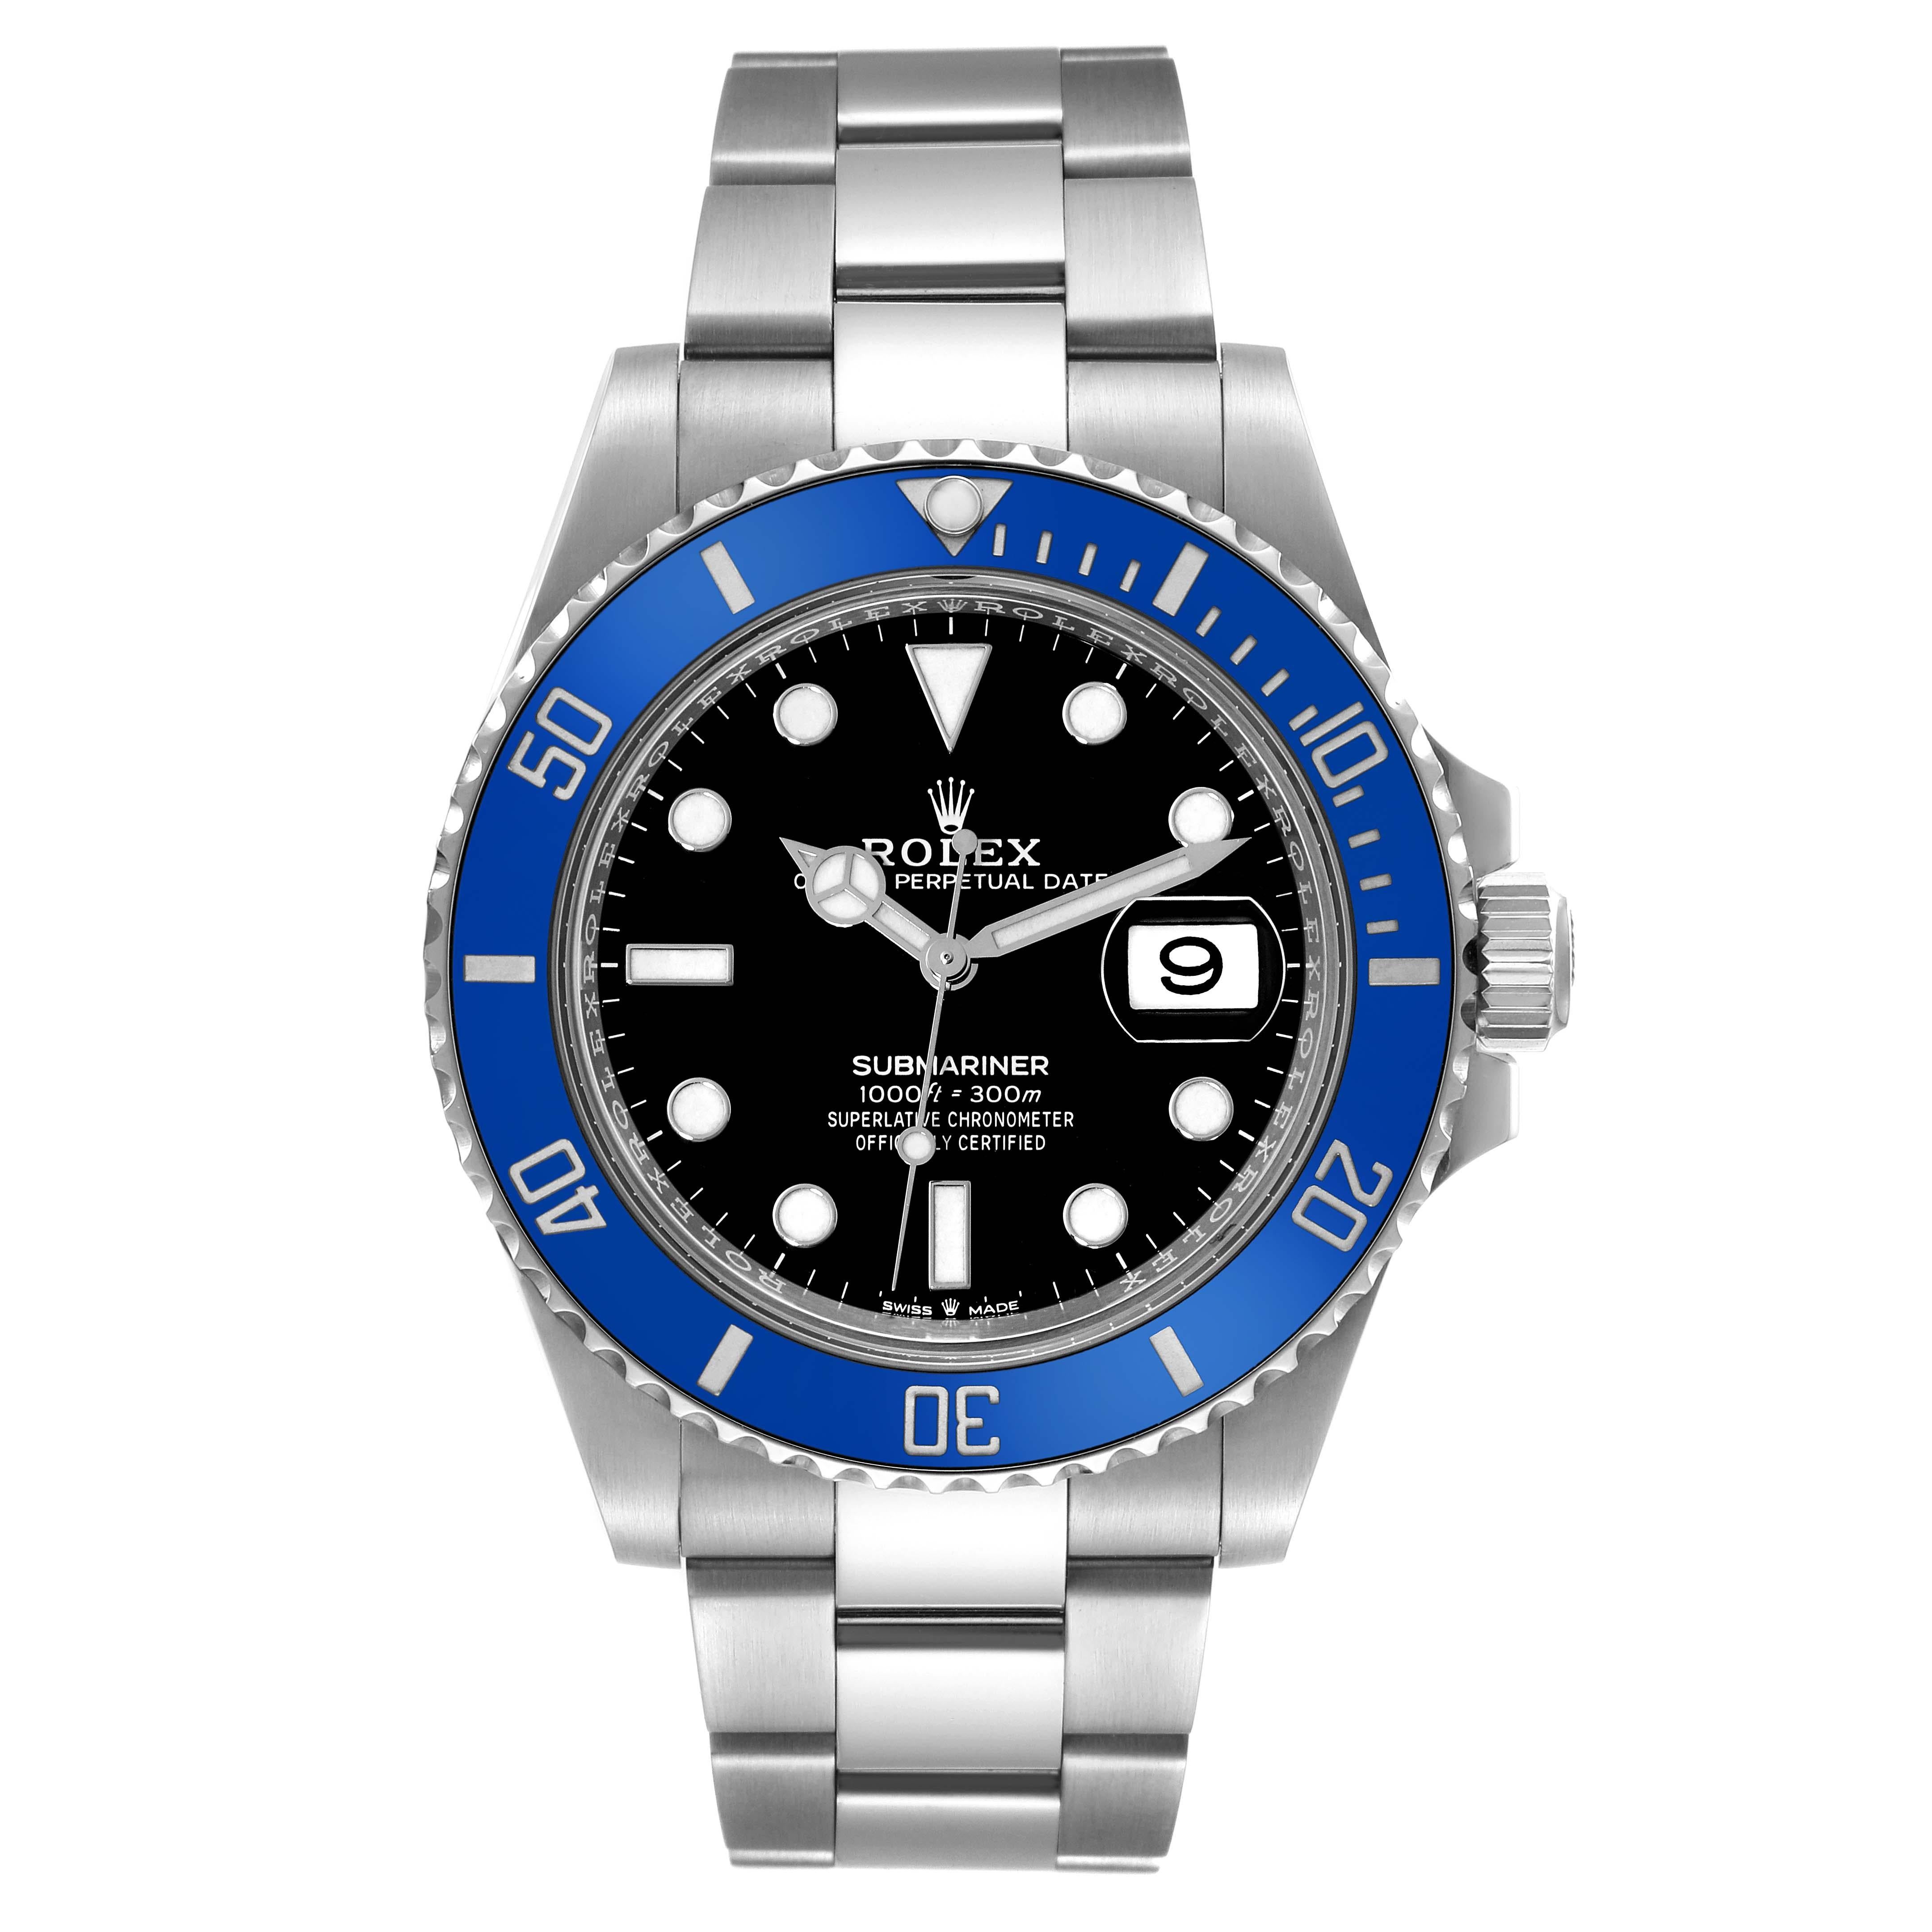 Rolex Submariner Cookie Monster Blue Ceramic Bezel White Gold Mens Watch 126619. Officially certified chronometer automatic self-winding movement. Paramagnetic blue Parachrom hairspring. 18k white gold case 41 mm in diameter. Rolex logo on the